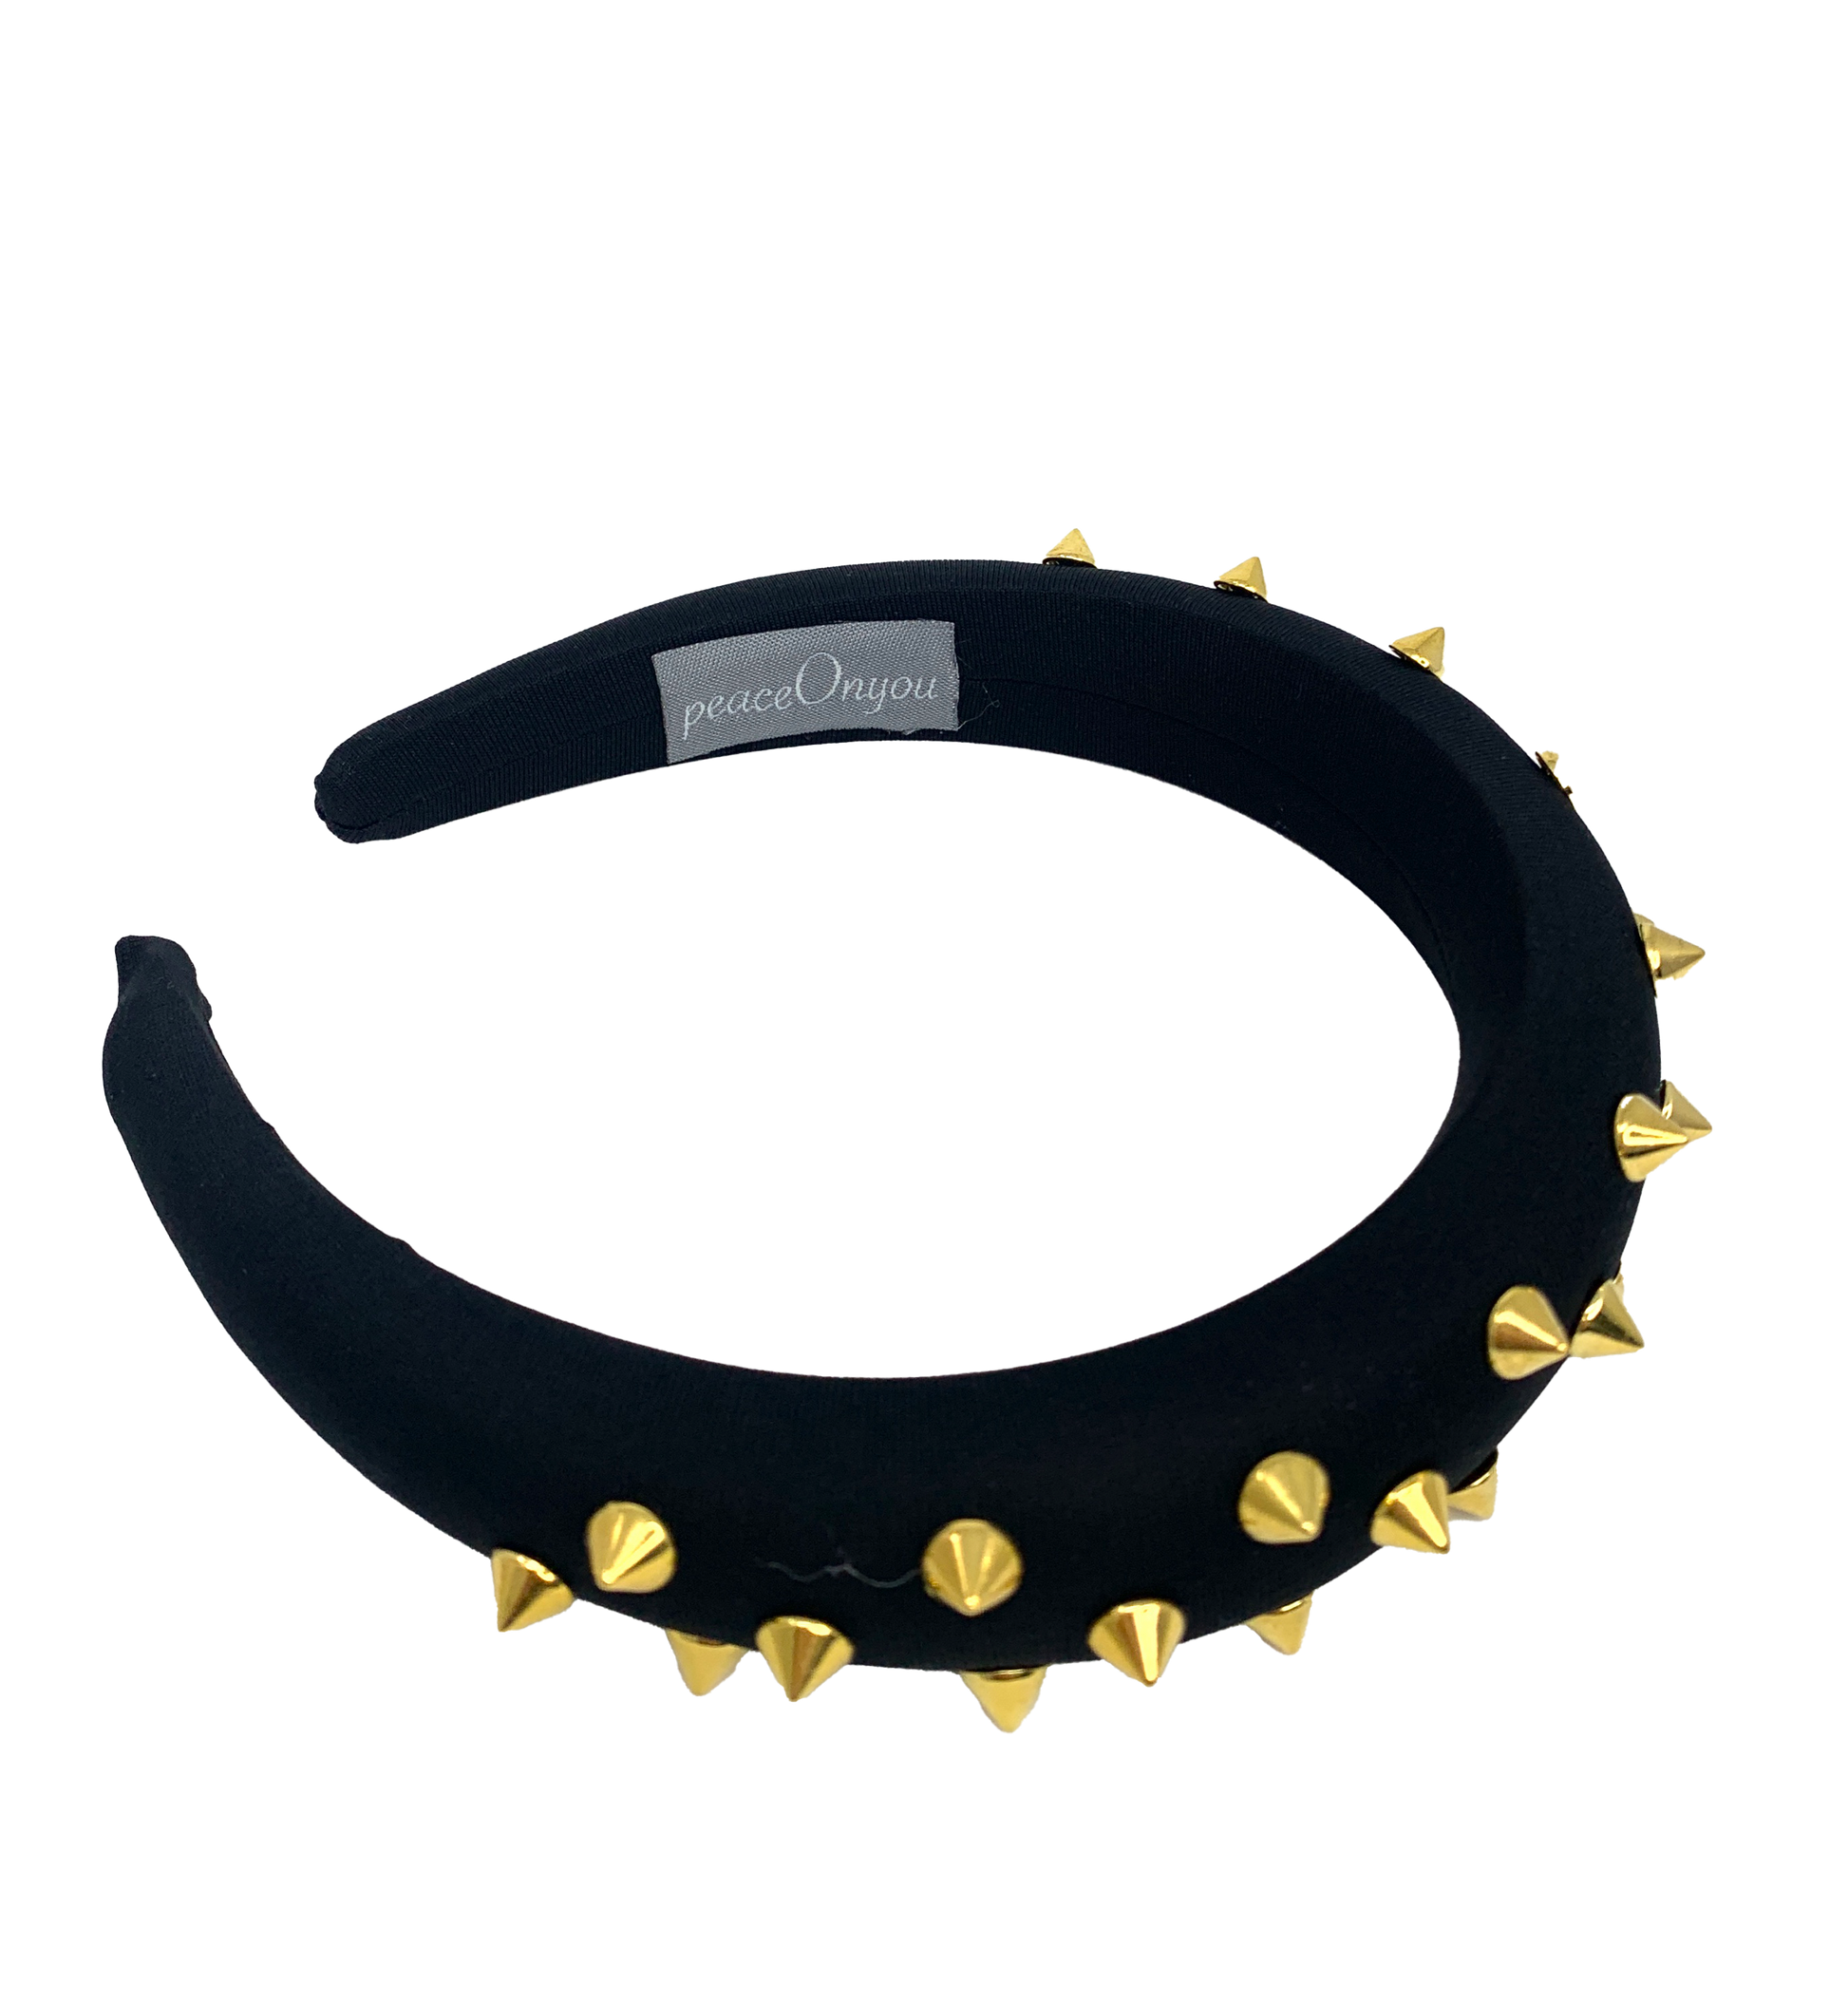 Black padded headband with gold spikes